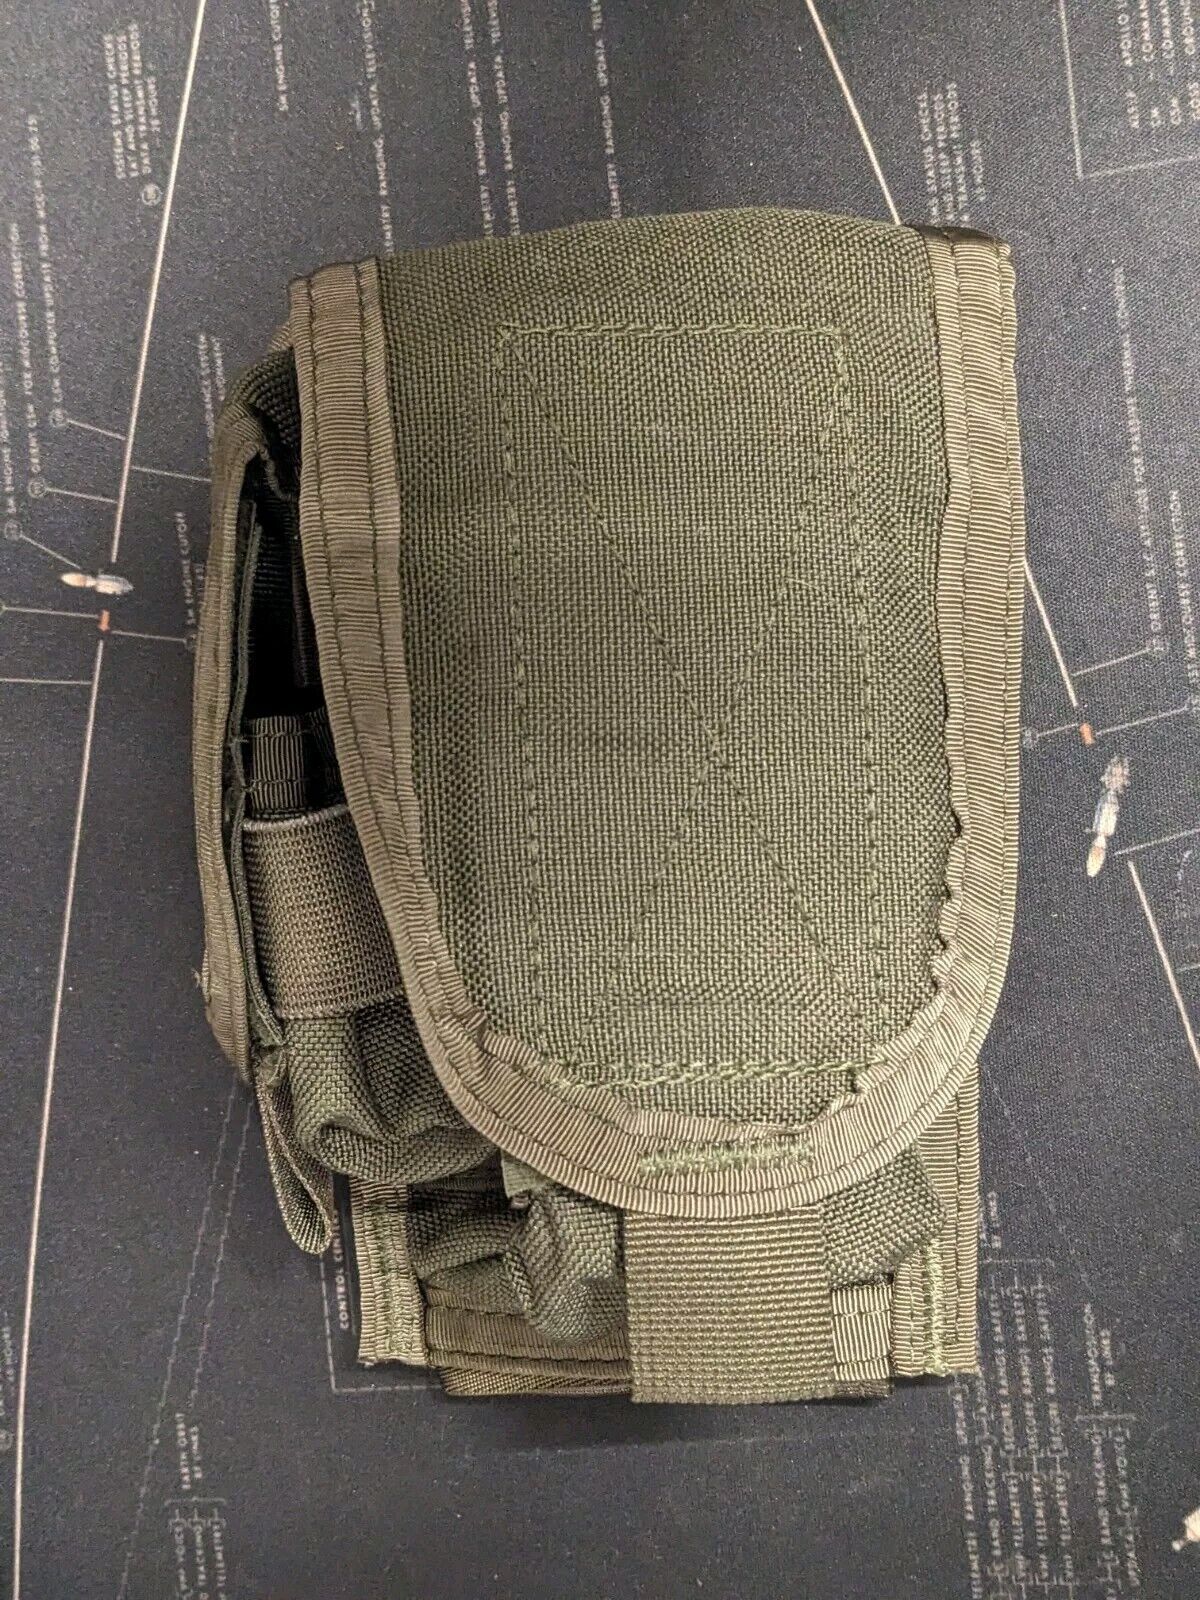 Pre MSA smoke Green Paraclete Double Mag Pouch With 40mm Cag Sof Devgru Seal